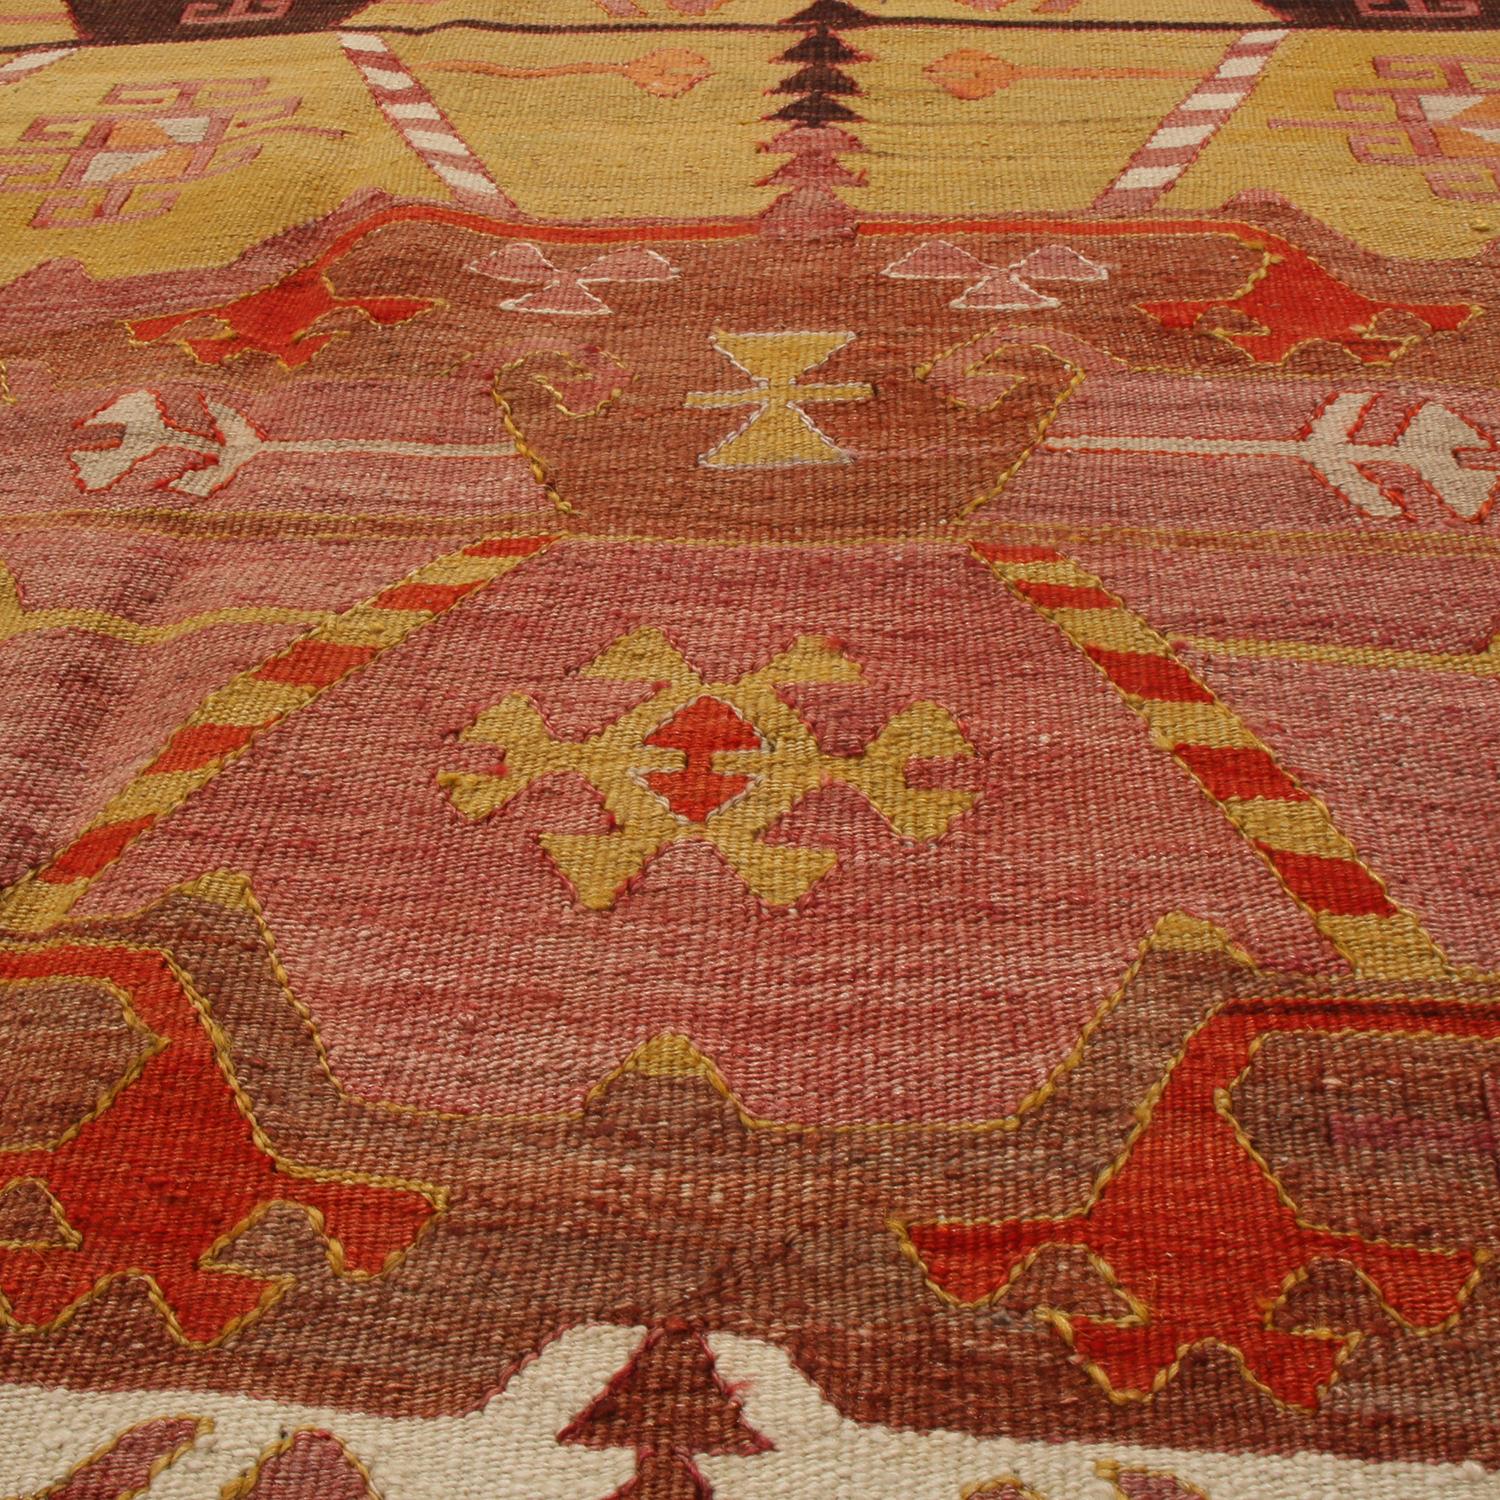 Vintage Emirdag Multi-Tonal Red Wool Kilim Rug by Rug Kilim In Excellent Condition For Sale In Long Island City, NY